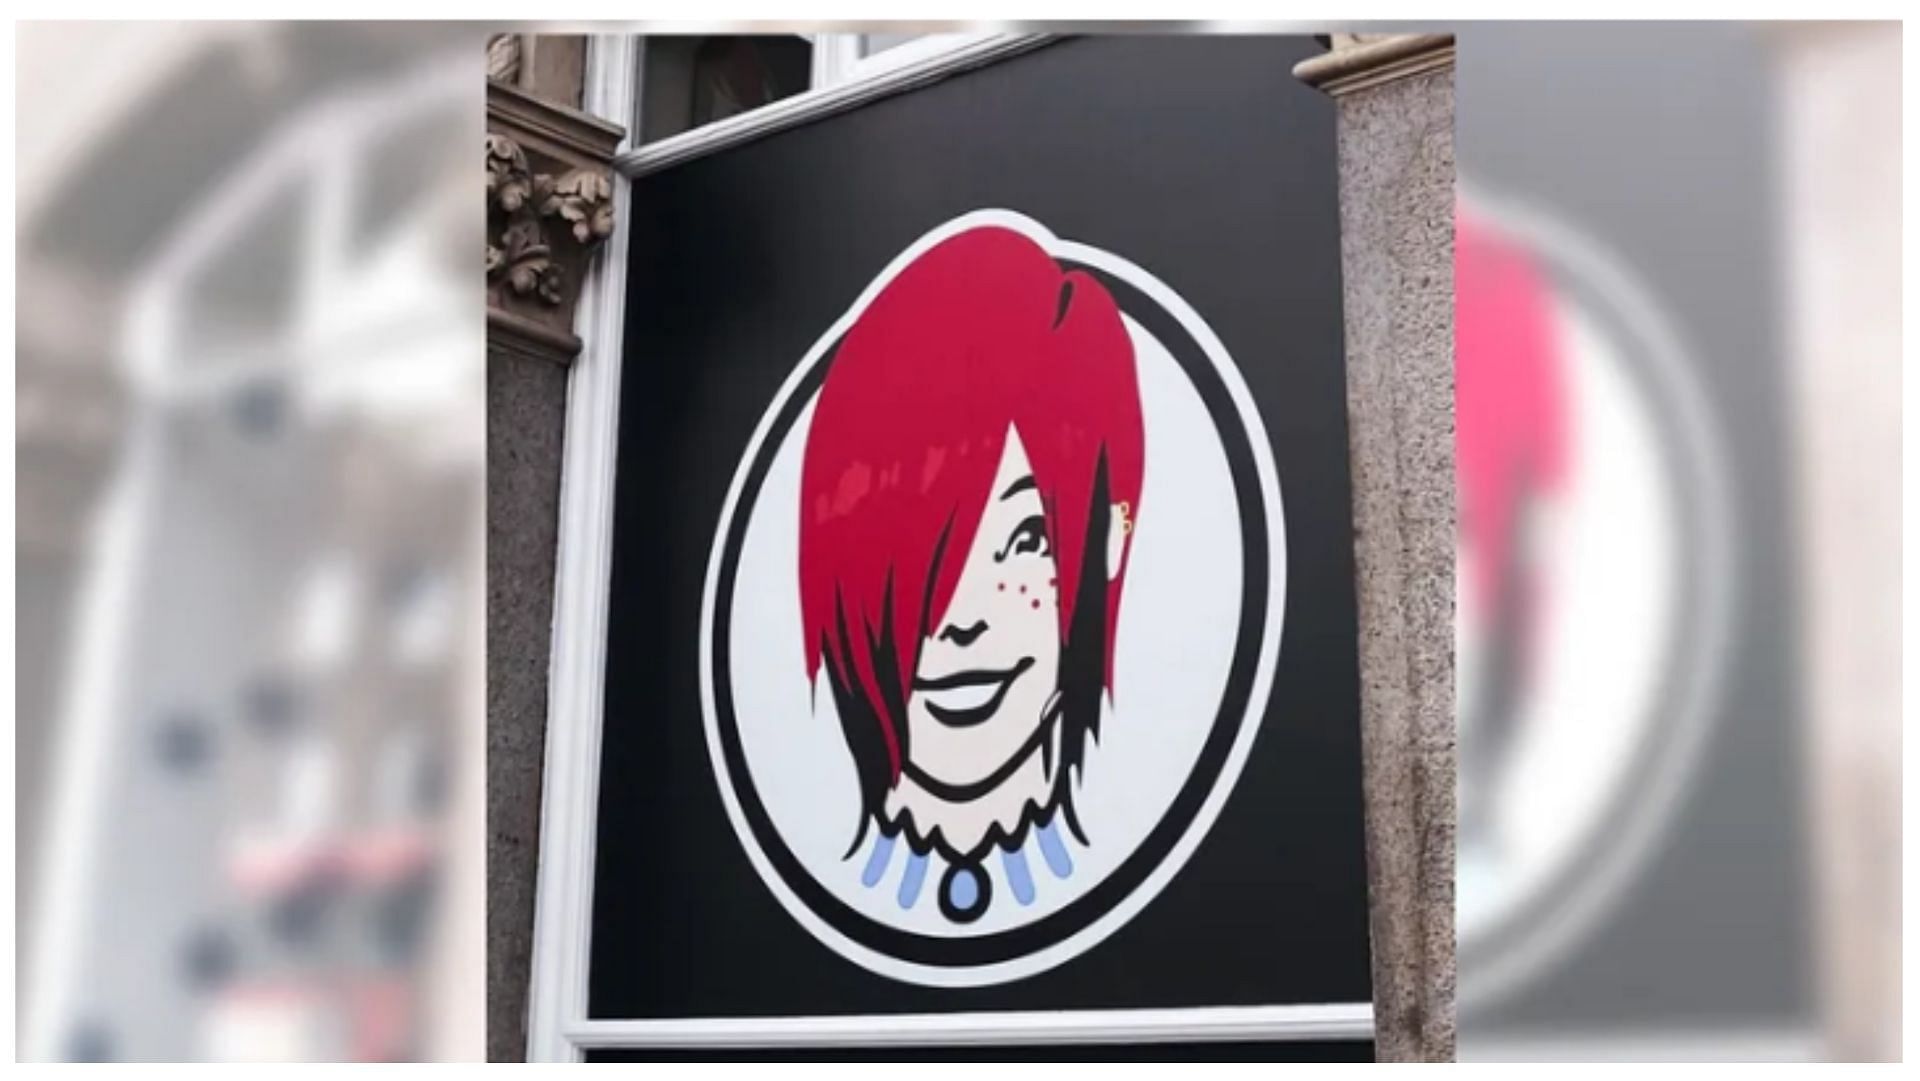 Wendy&#039;s unveiled the &#039;emo&#039; version of their logo in the newly opened Camden franchise (Image via Twitter/@yasminesummanx)